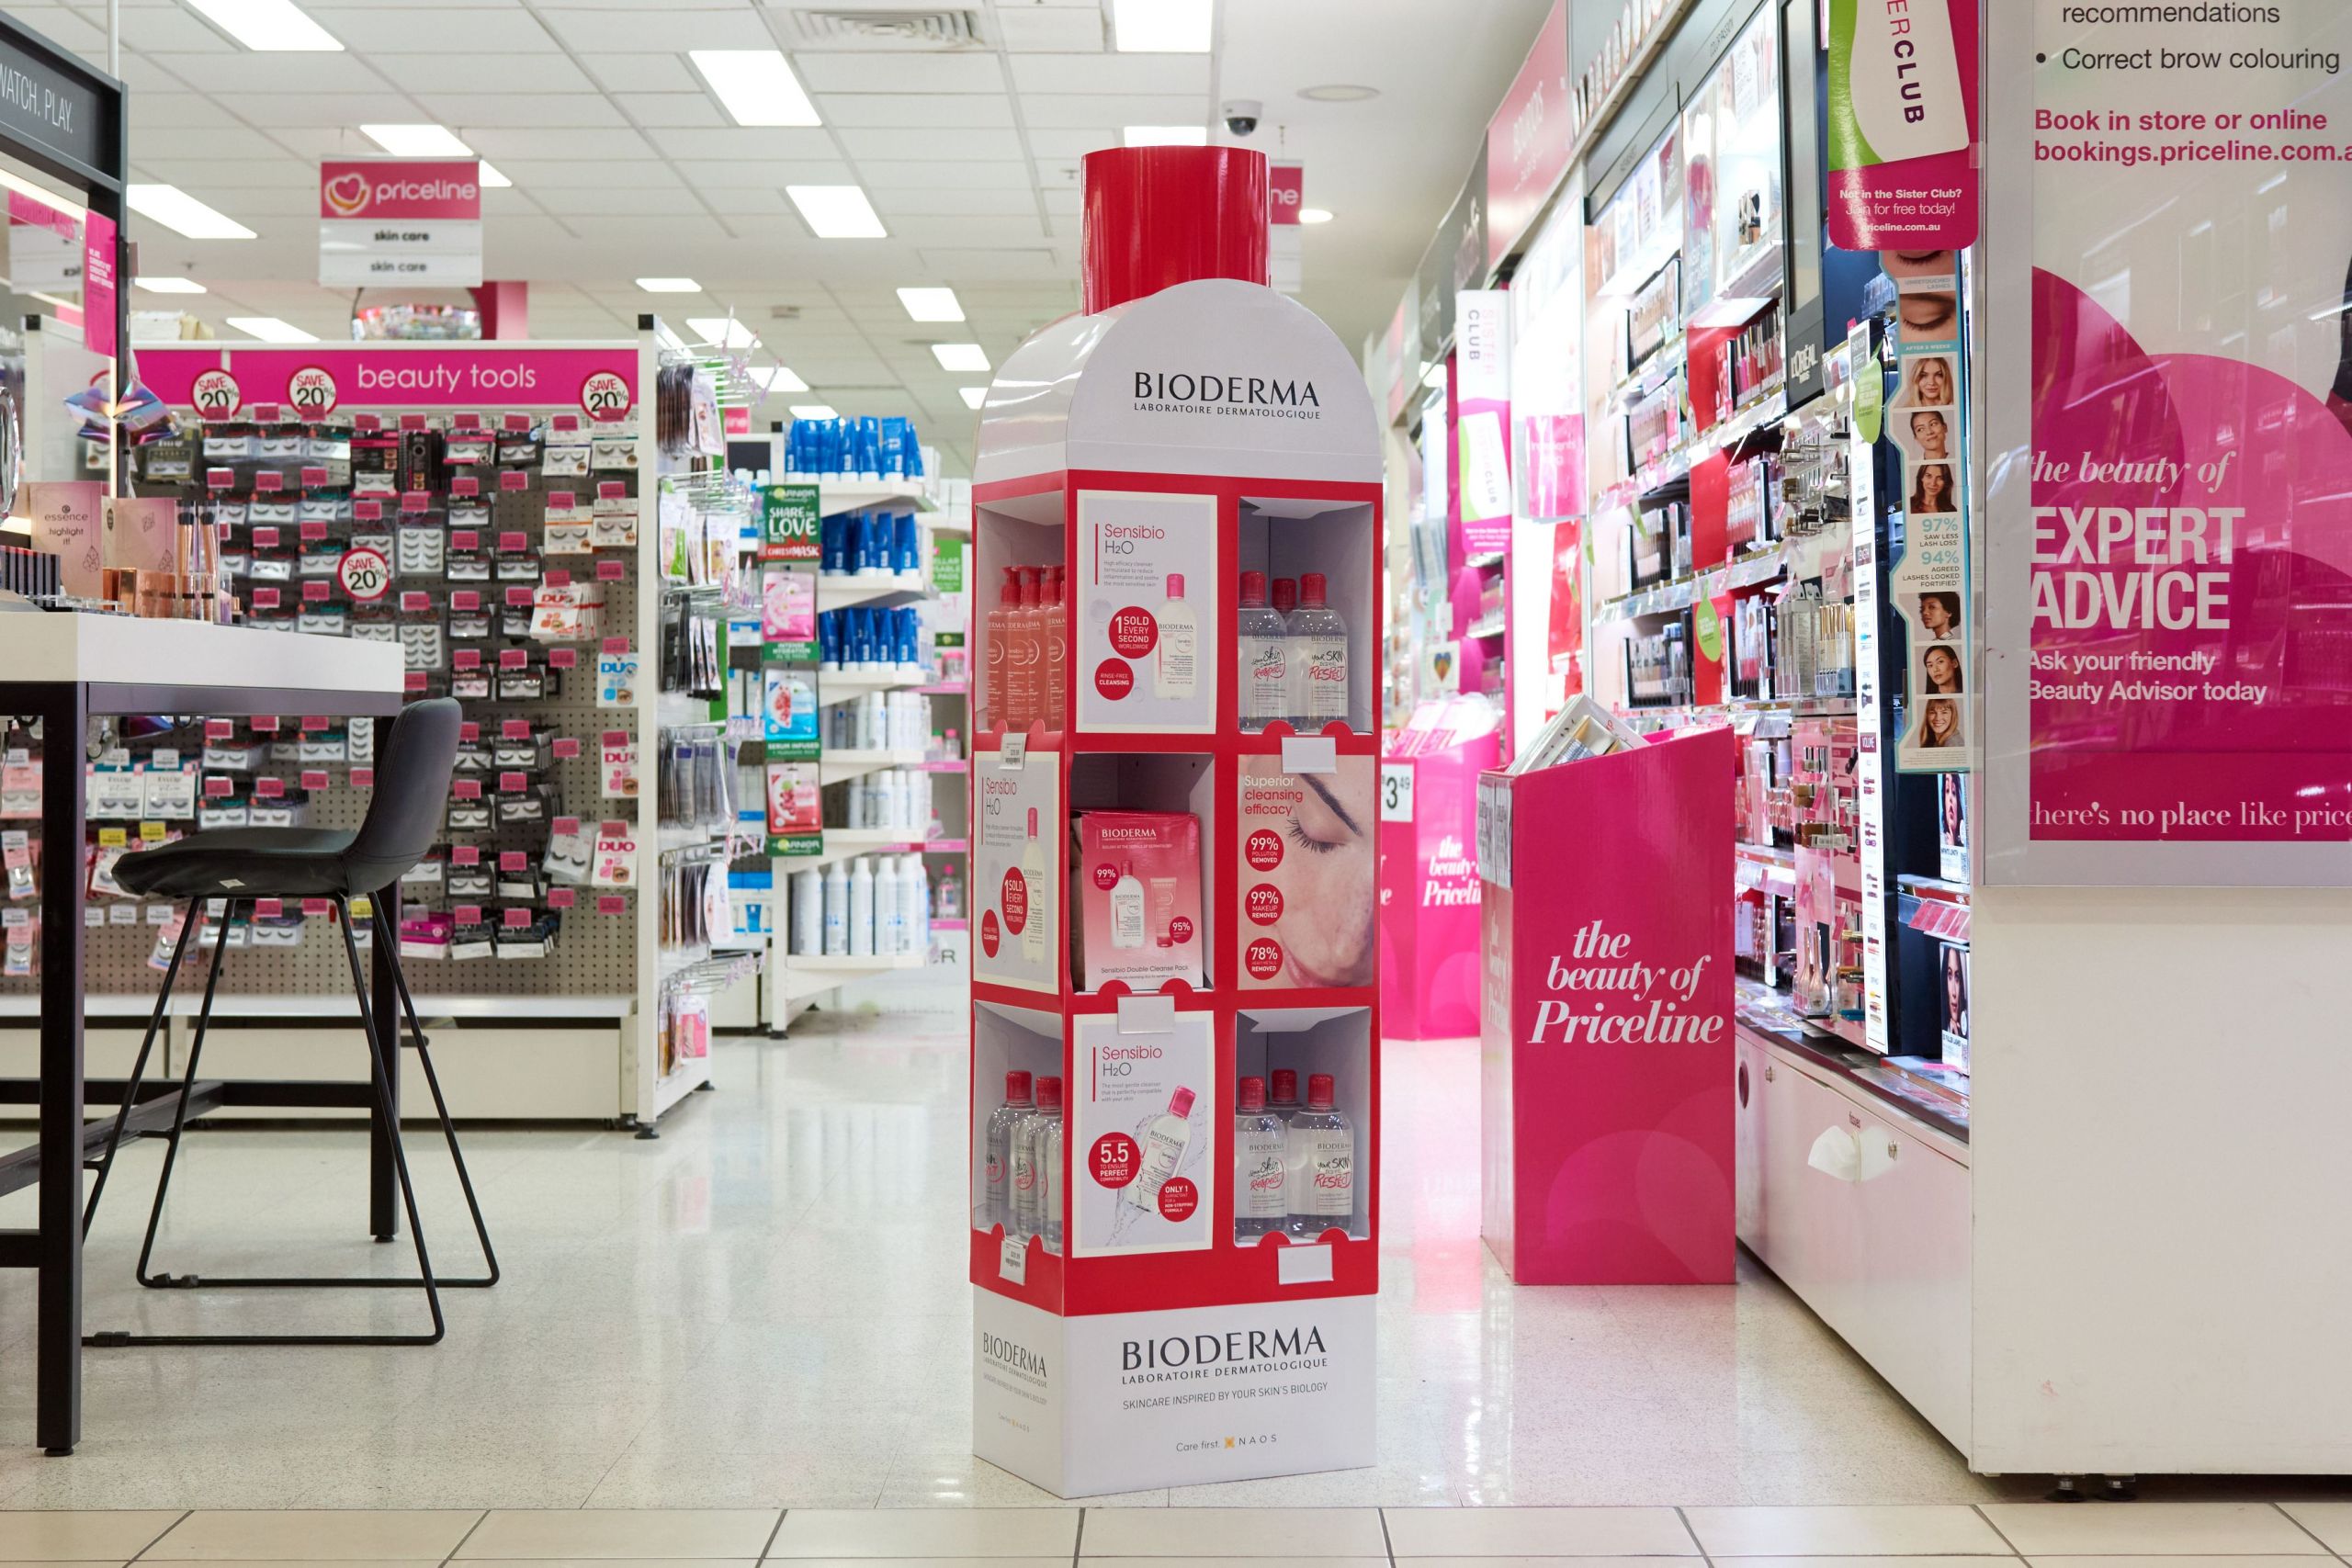 Bioderma product display in a long-shot in the middle of the sotre